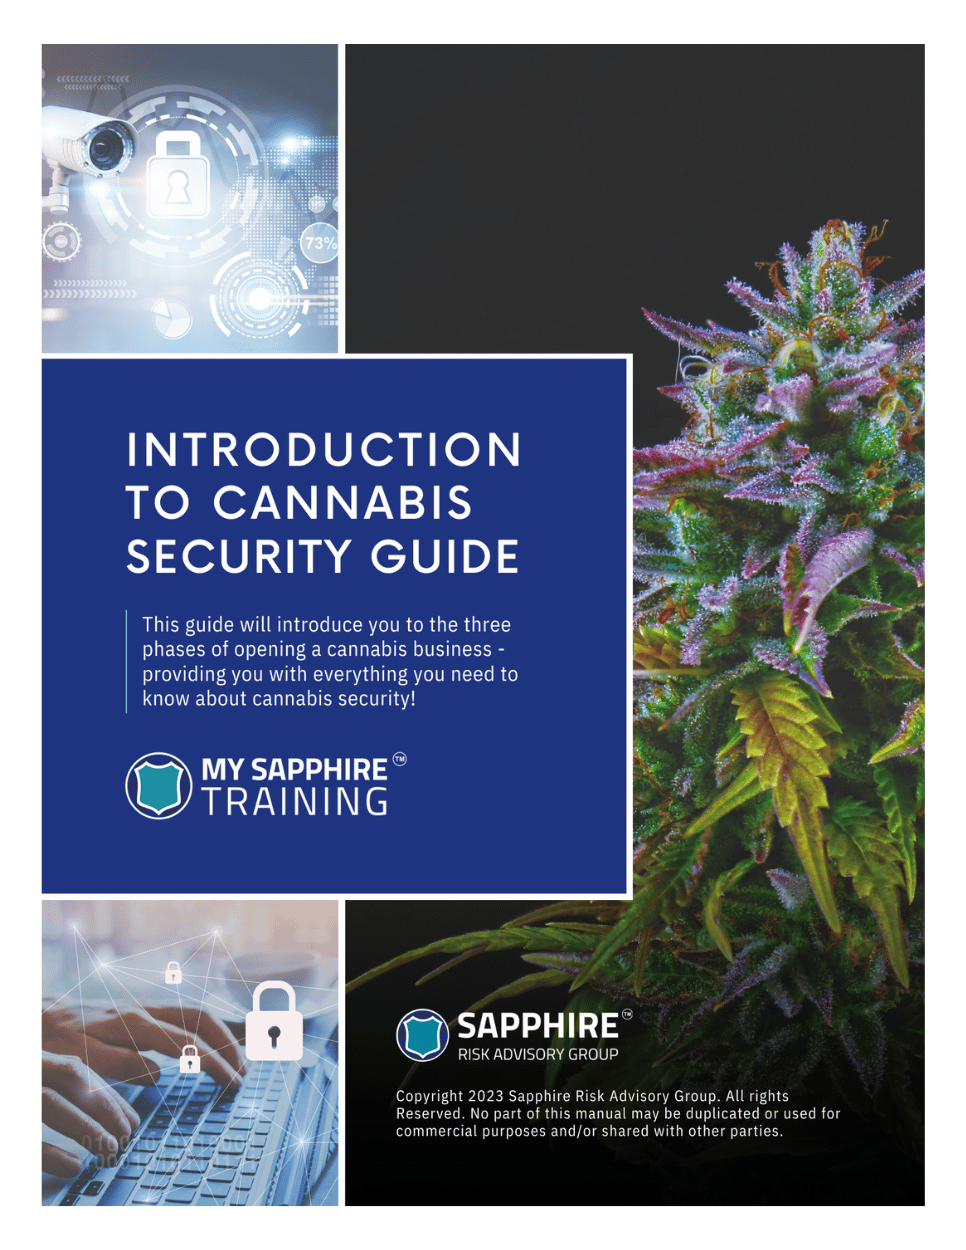 Introduction to Cannabis Security Course Cover